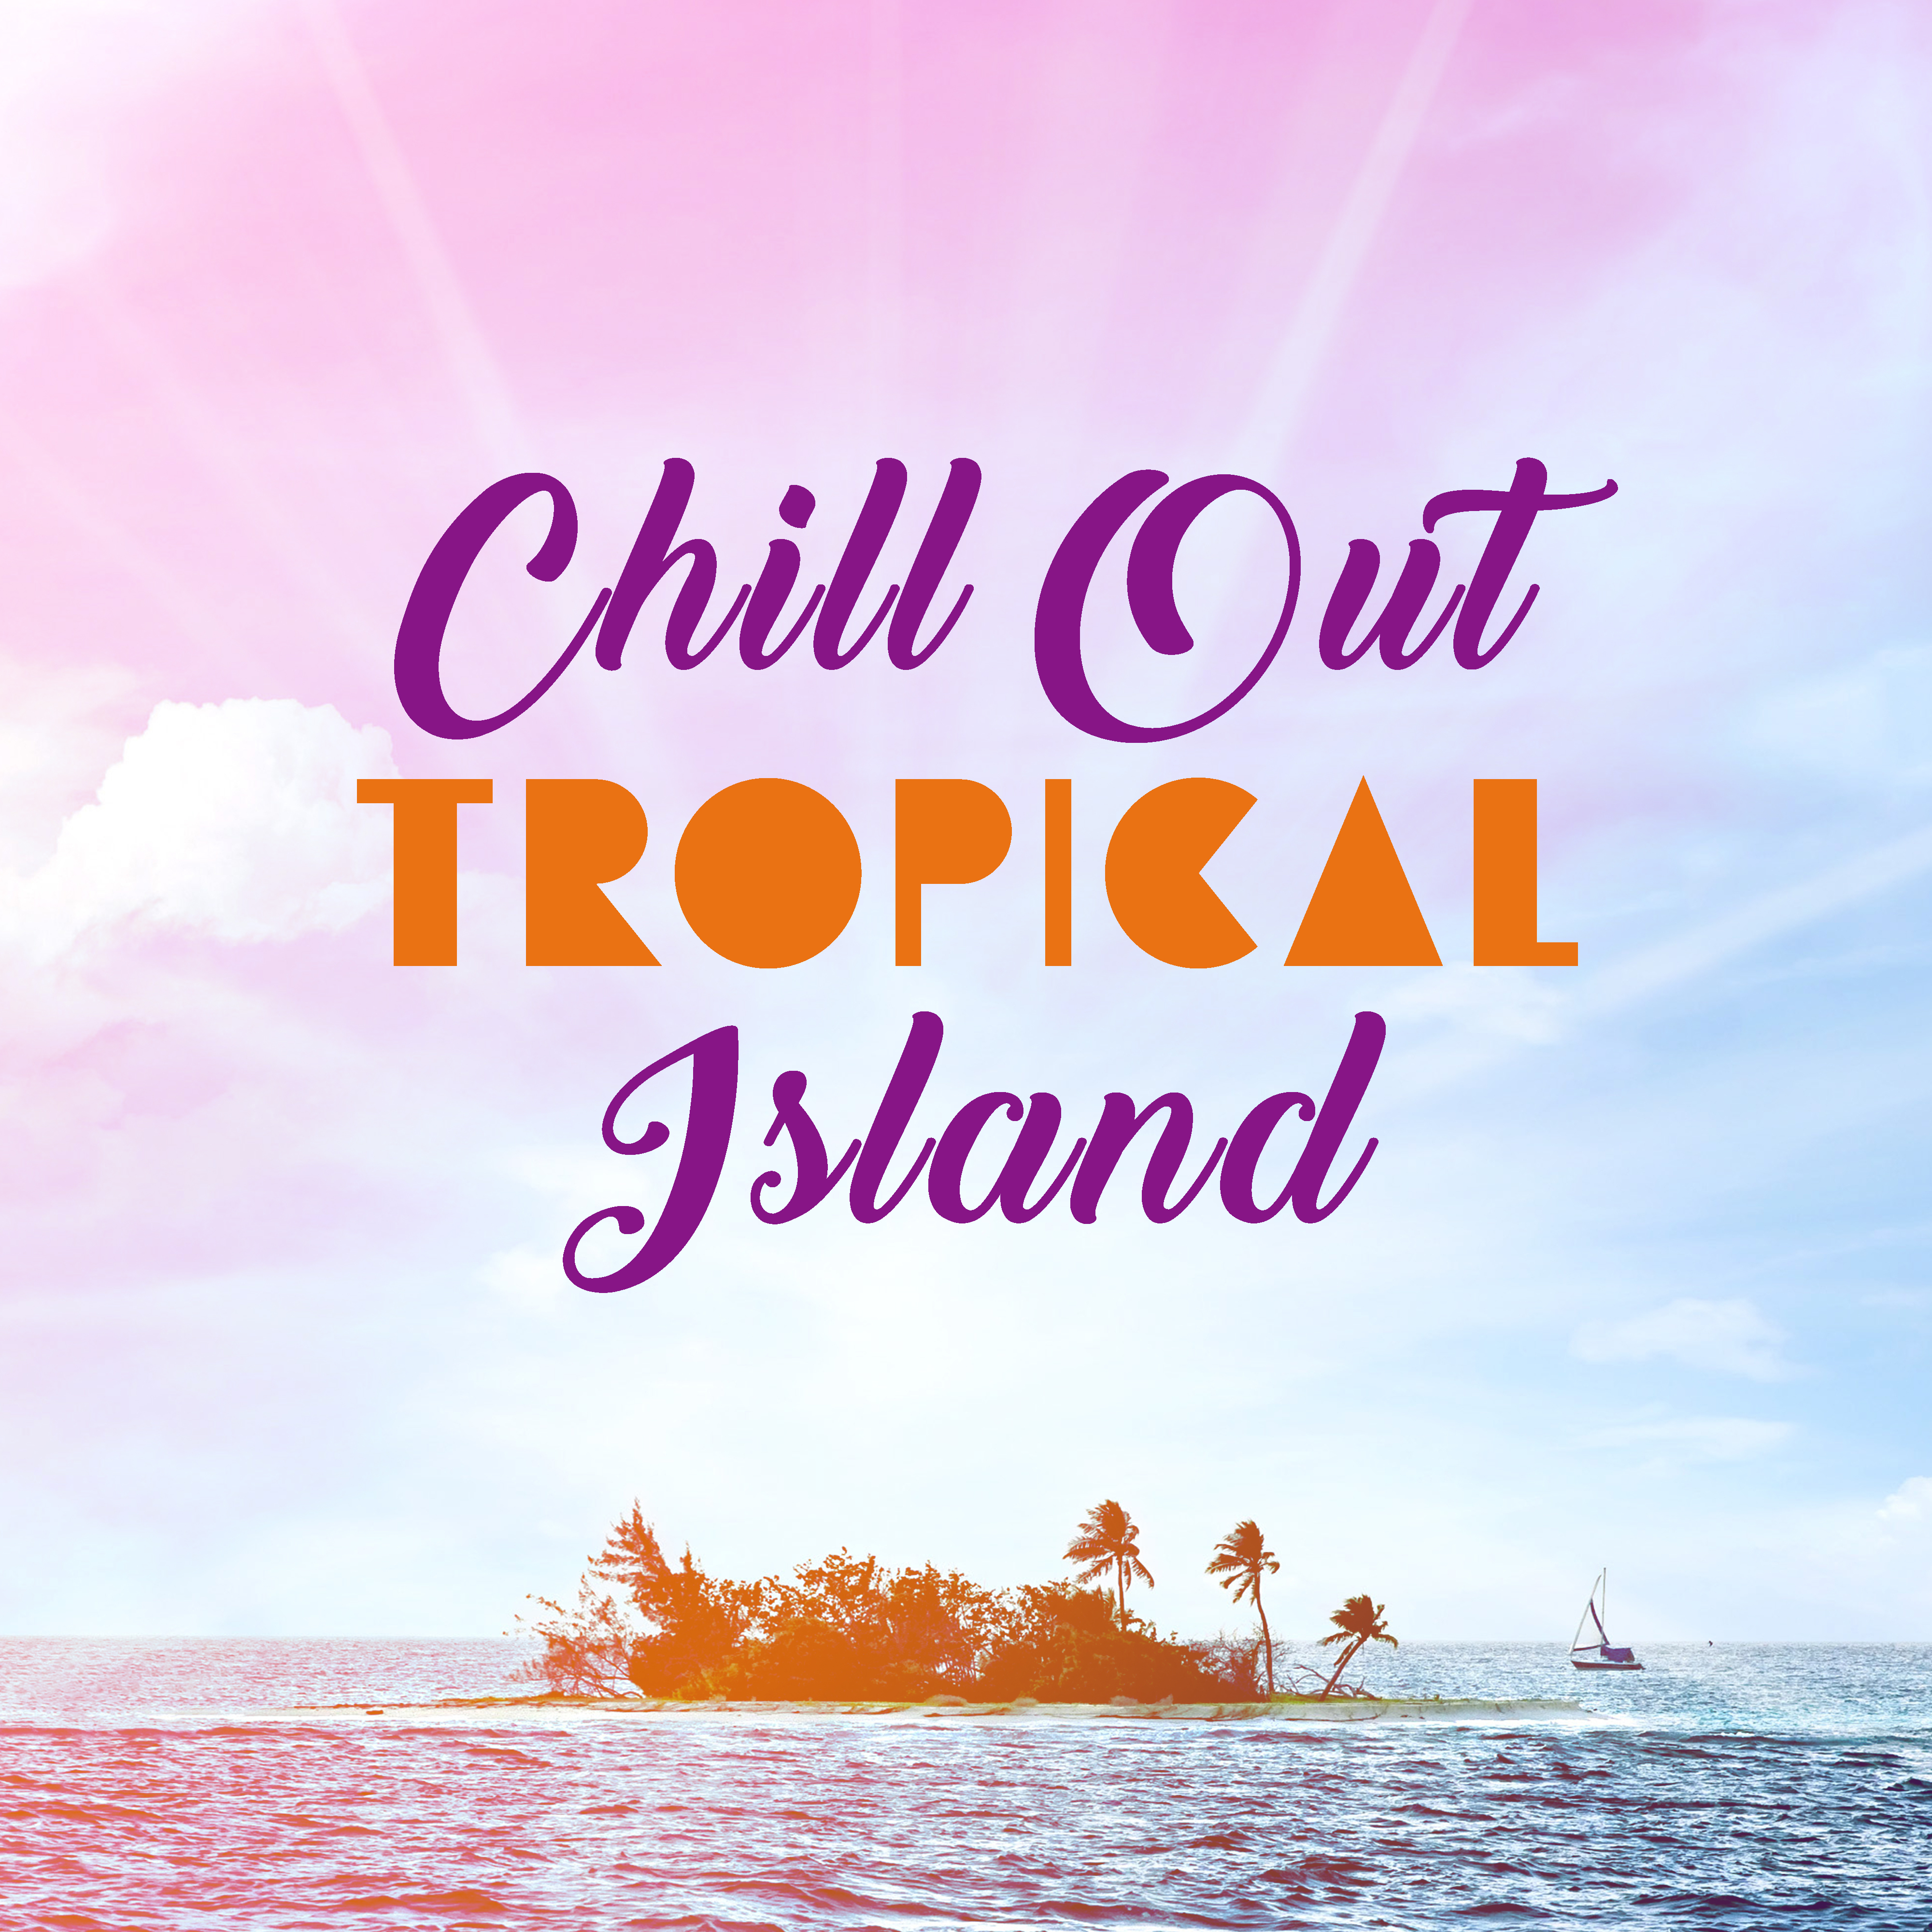 Chill Out Tropical Island – Peaceful Sounds, Exotic Chill Out Beats, Relaxing Journey, Stress Relief